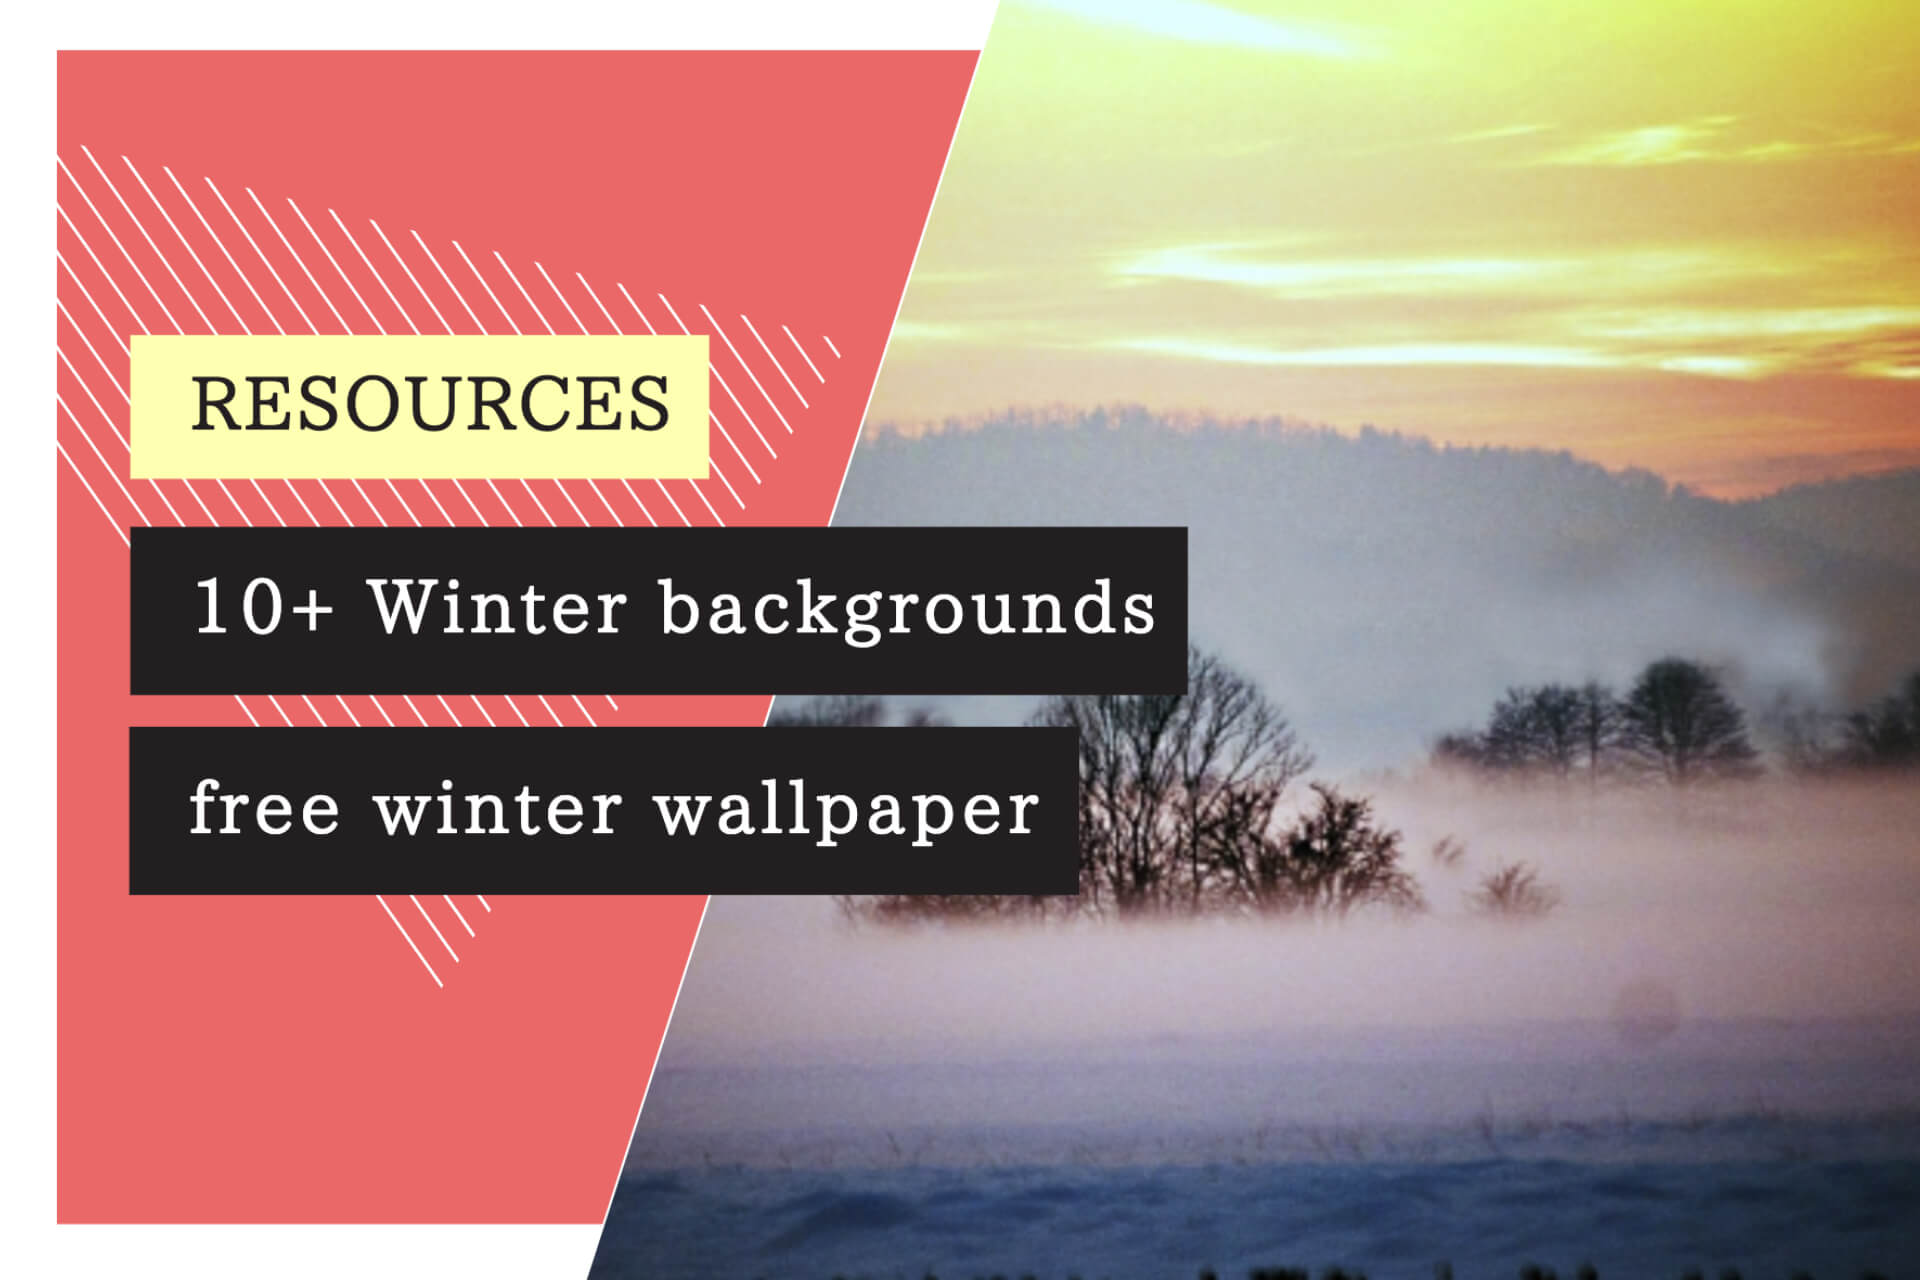 Graphic freebies: 10+ Winter backgrounds and free winter wallpaper for free download